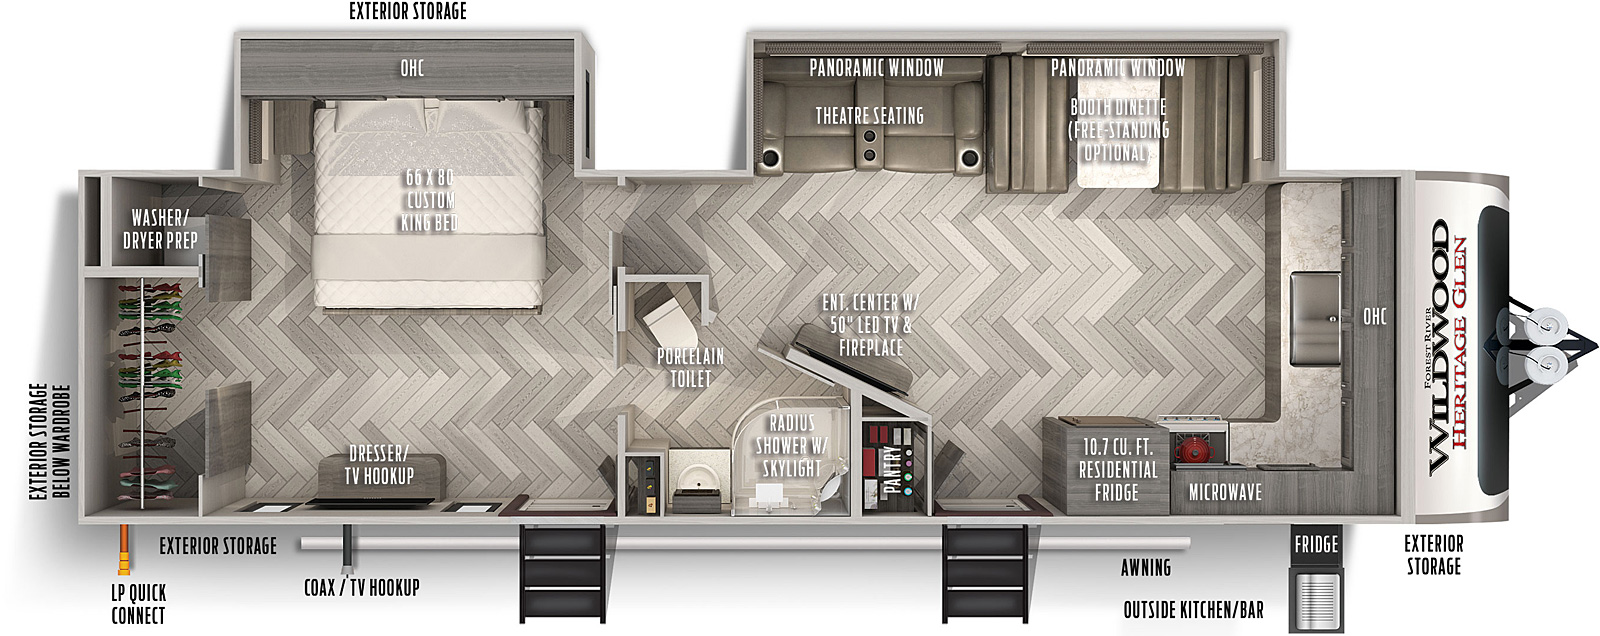 Heritage Glen 270FKS floorplan. The 270FKS has 2 slide outs and two plus entry doors.